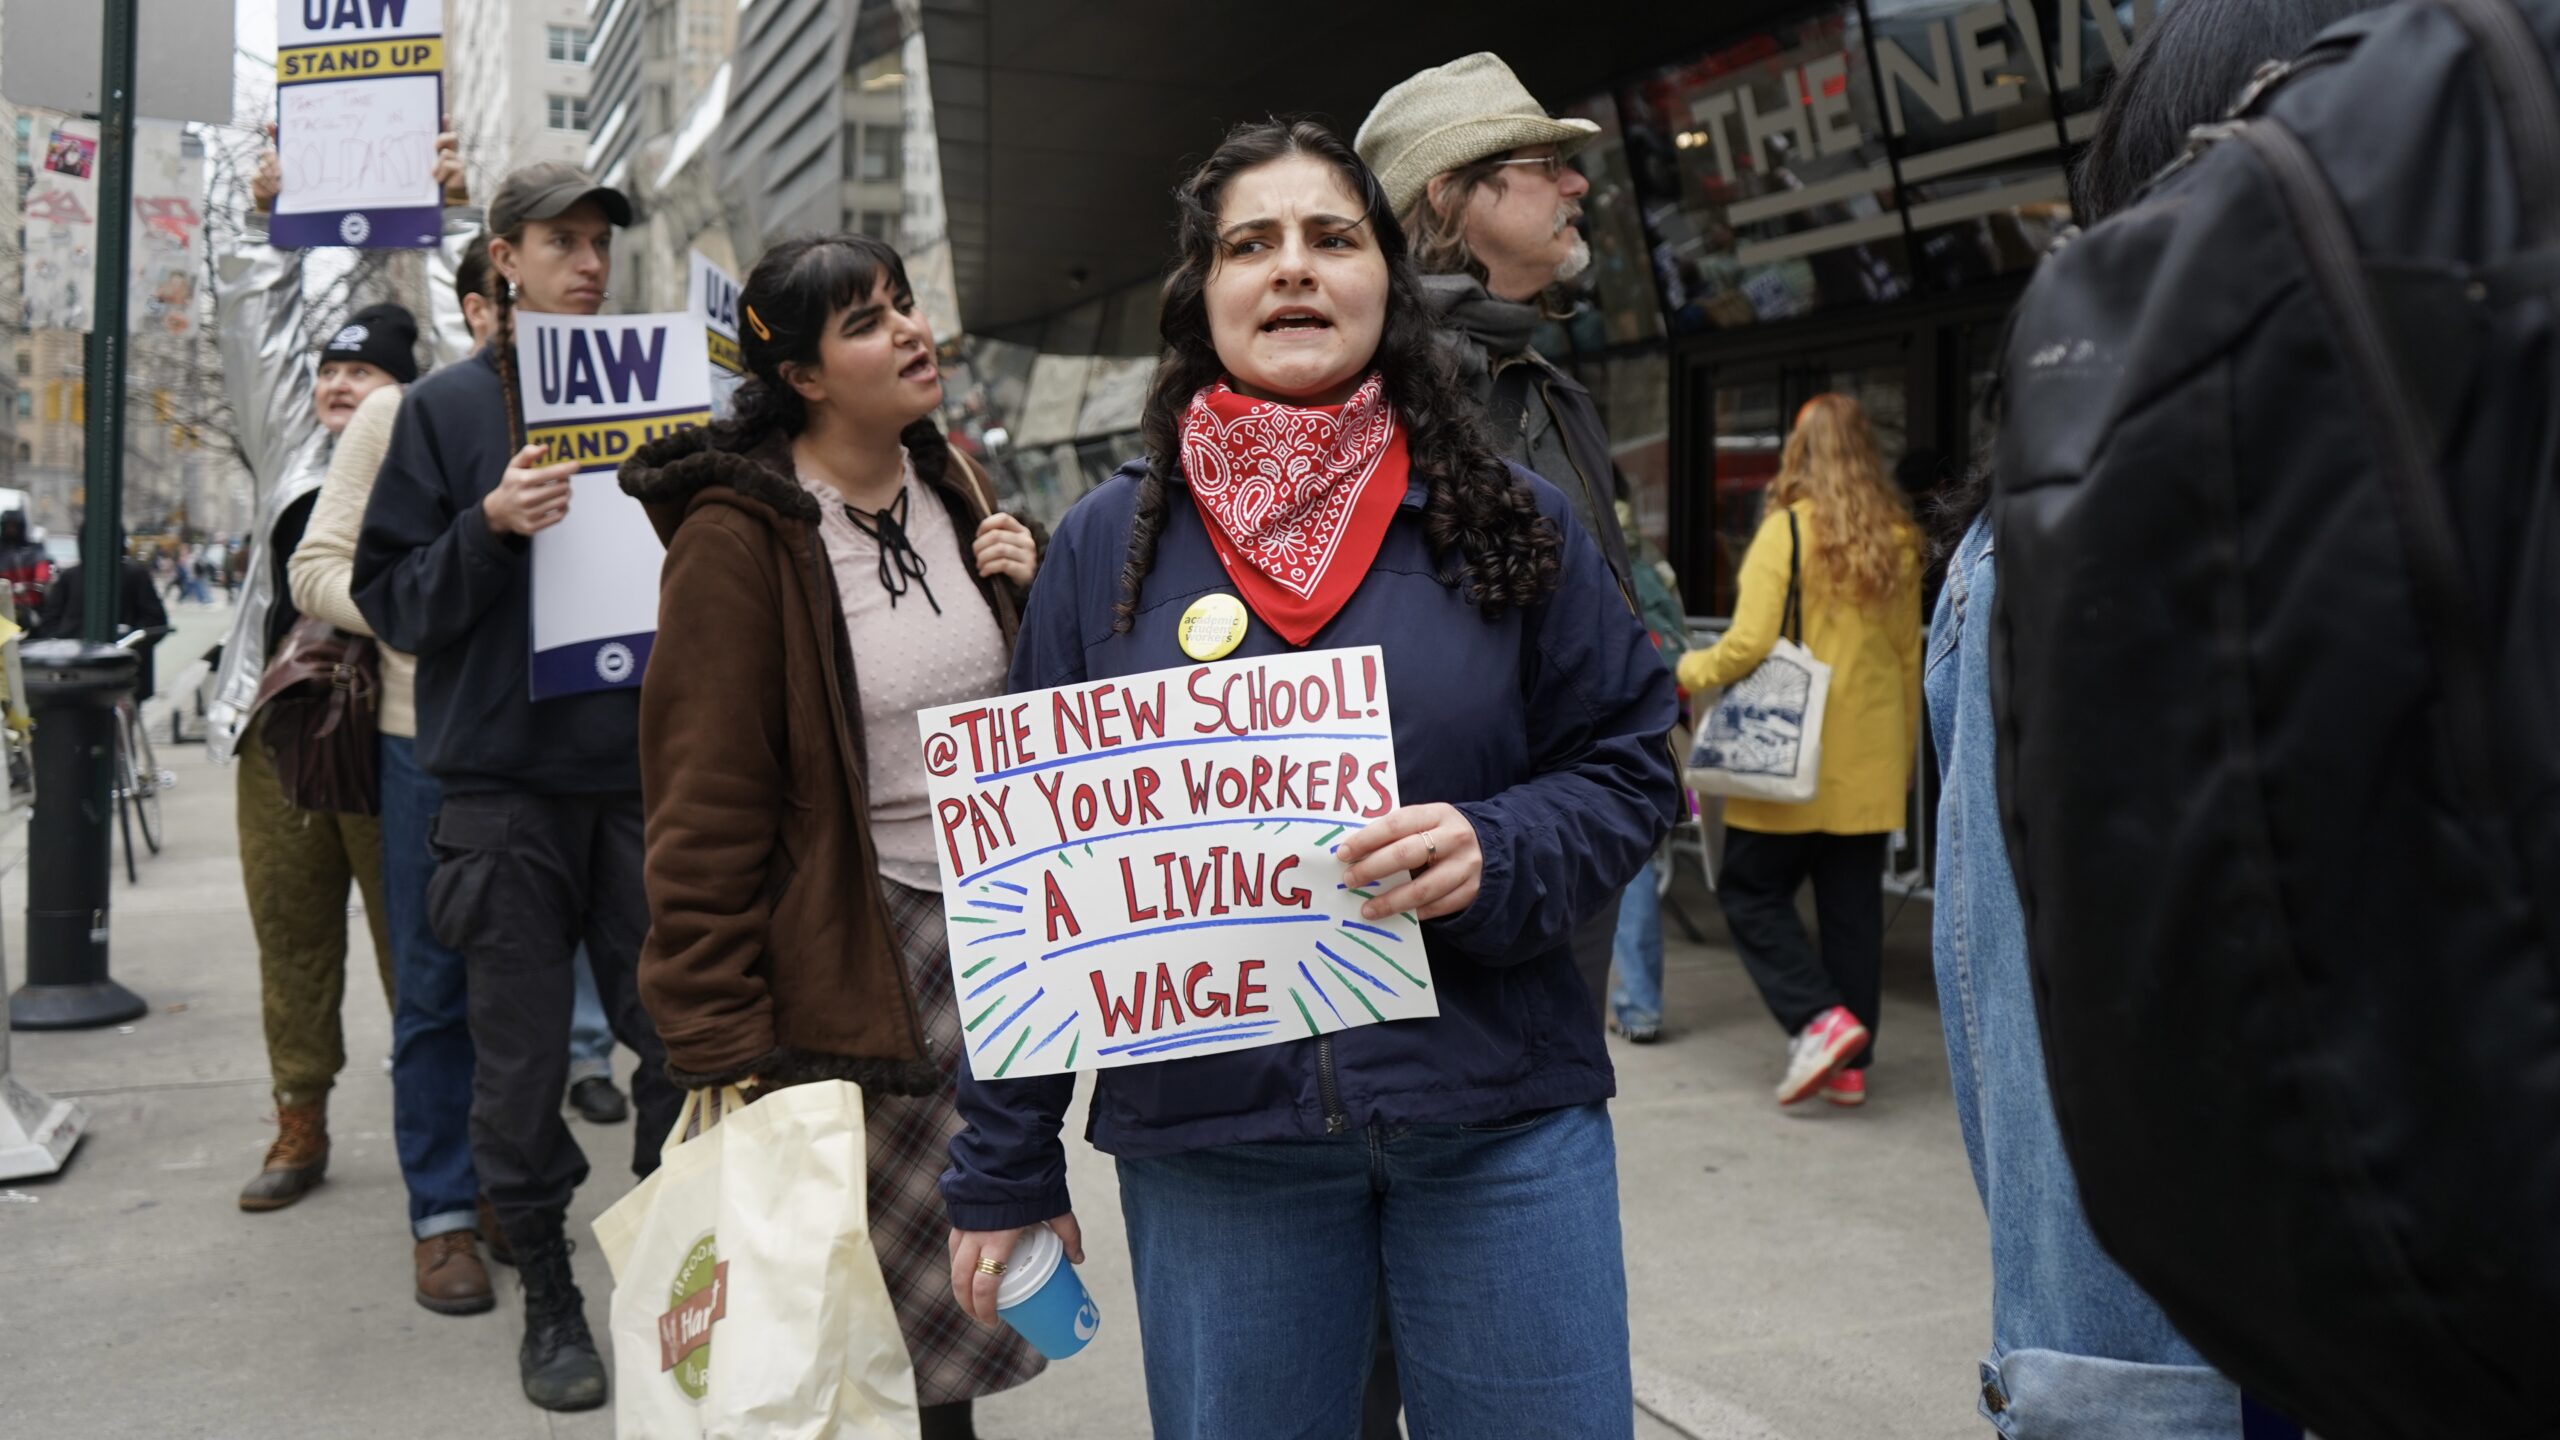 Image of a picketer outside of The New School University Center holding up a sign that reads “@ The New School! Pay your workers a living wage.” More protesters are seen in the background walking along the picket line chanting and holding UAW union posters.